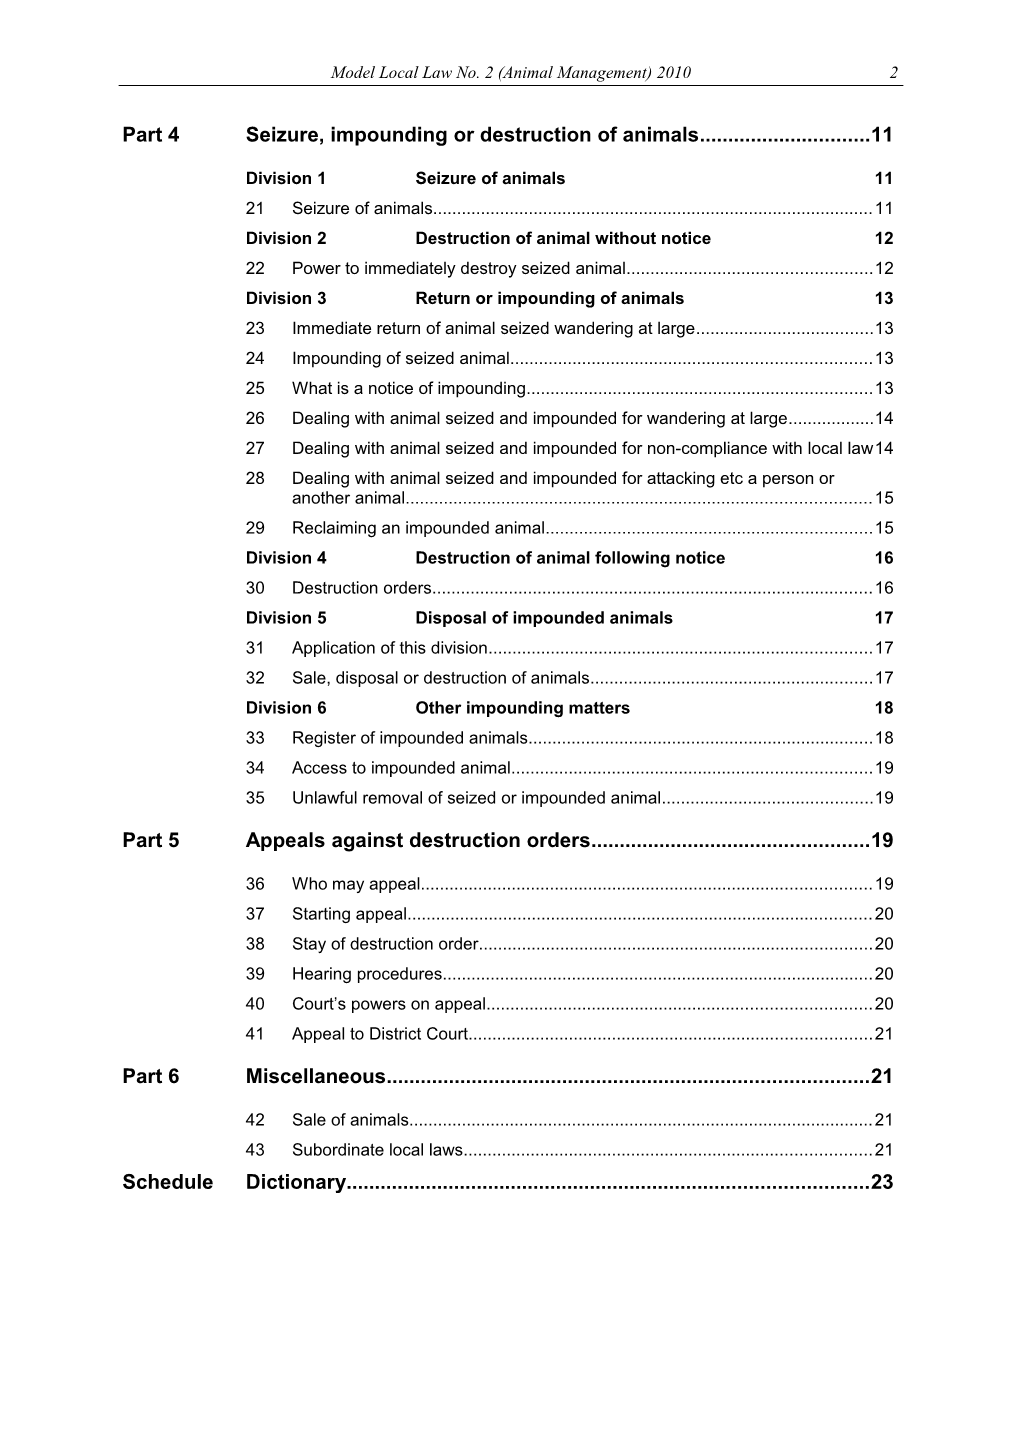 Model Local Law No 2 (Animal Management) 2010